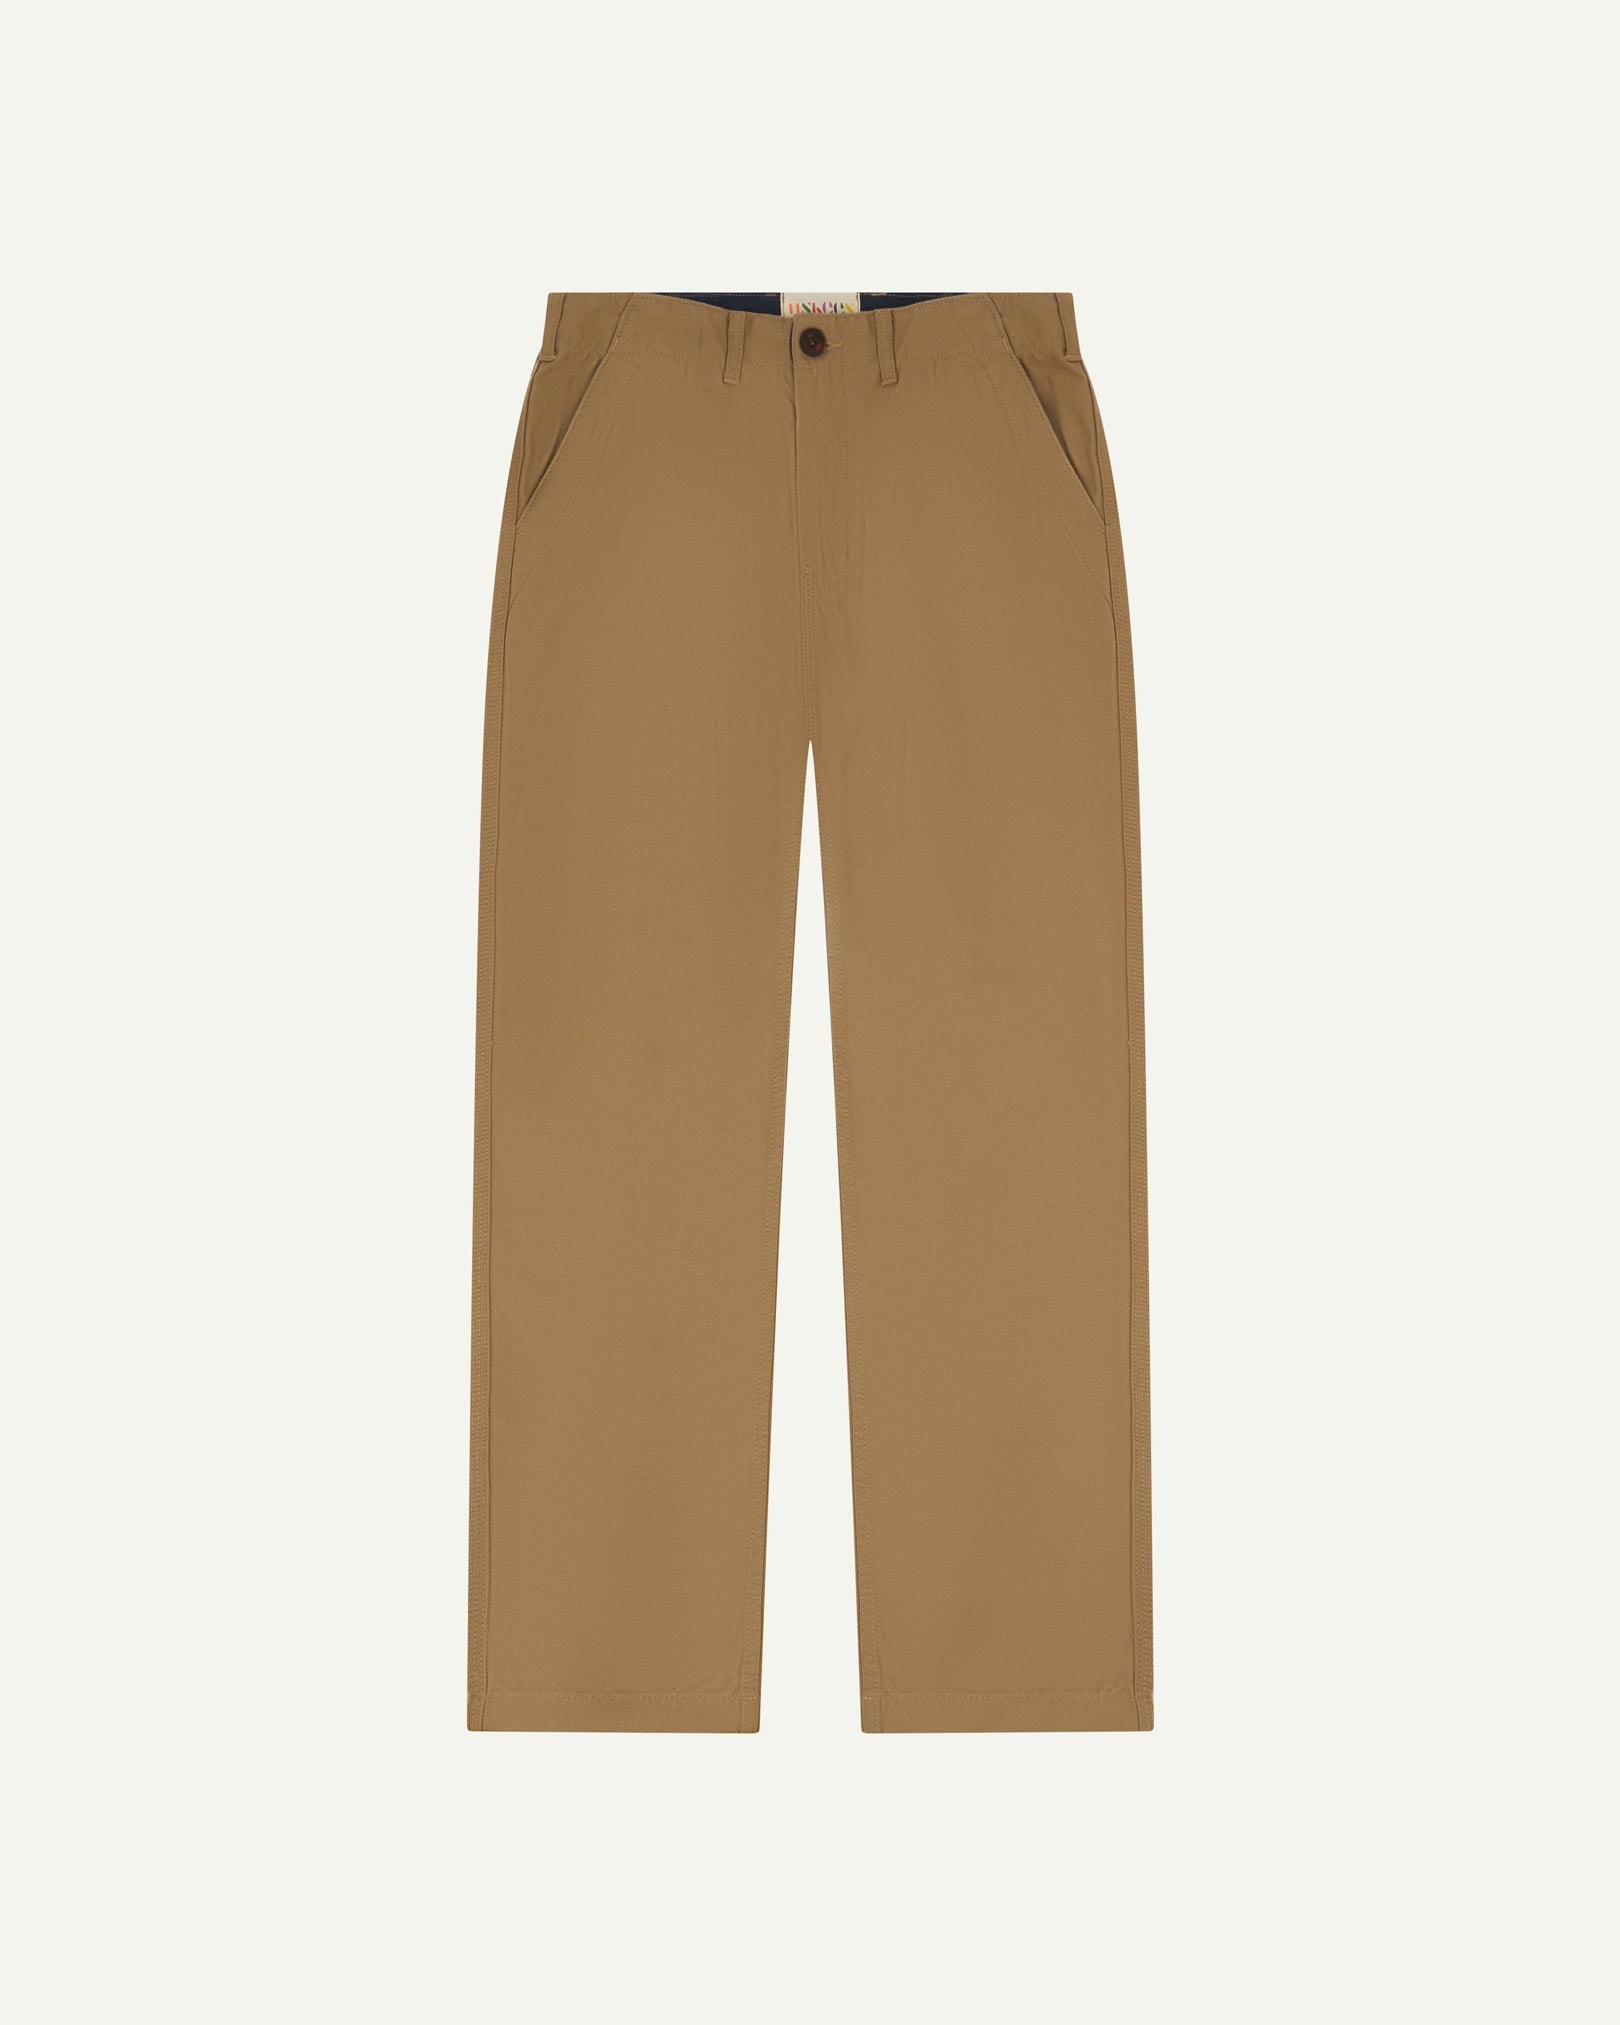 Front flat view of 5005 Uskees men's organic cotton khaki casual trousers with view of YKK zip fly and Corozo buttons.